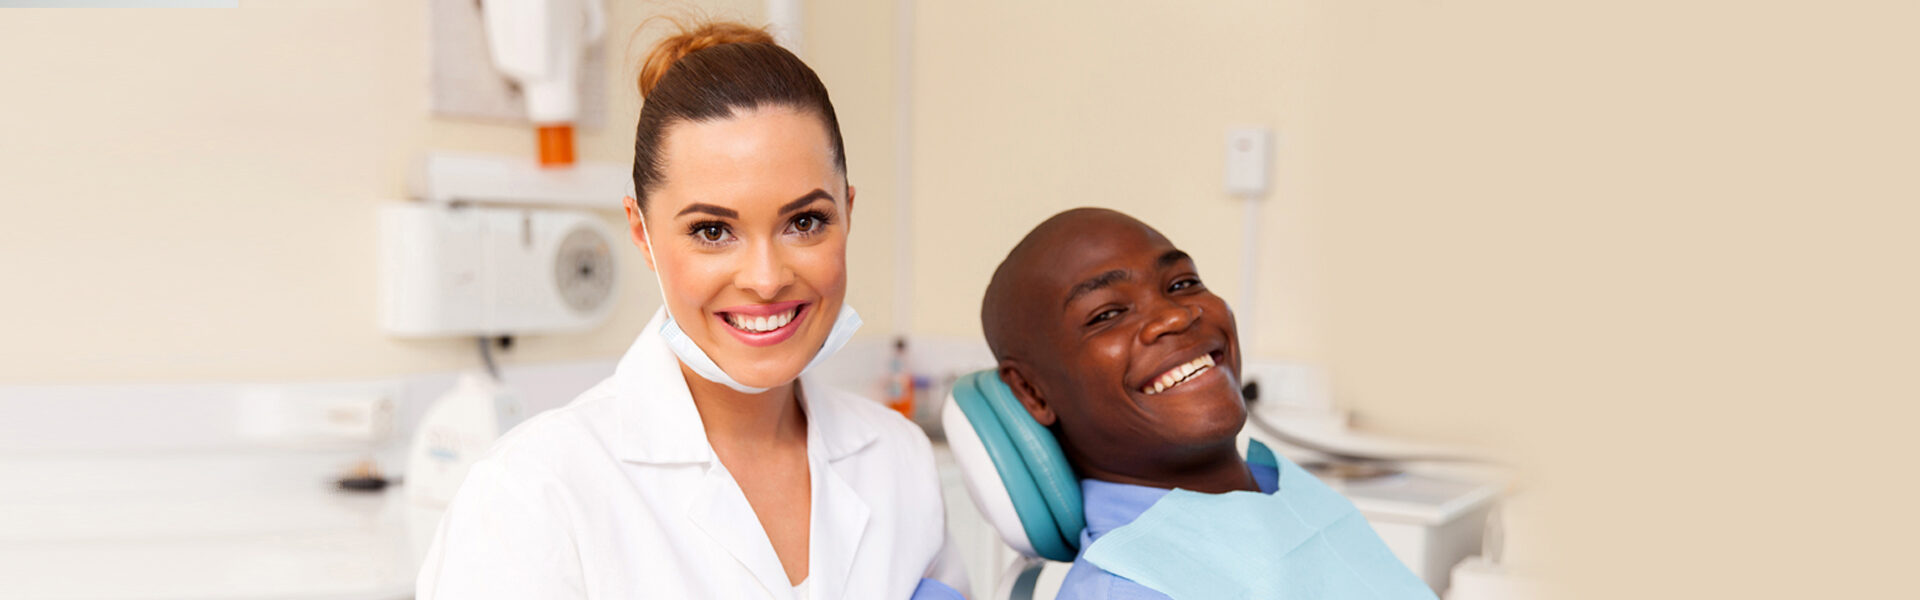 General Dentistry in Smithtown, NY